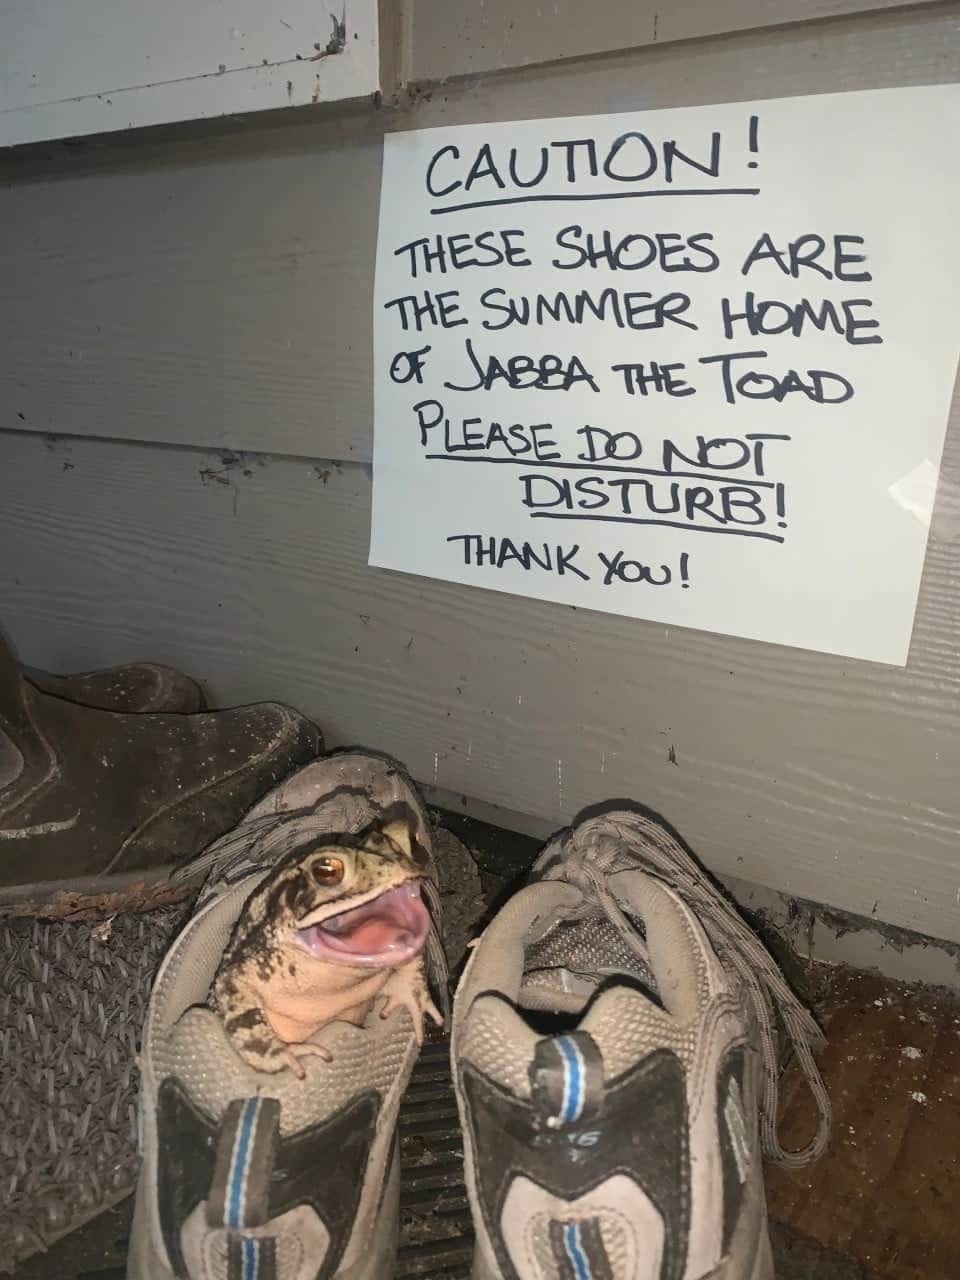 A toad inside one of two sneakers, with handwritten sign above: "Caution: These shoes are the summer home of Jabba the Toad, PLEASE DO NOT DISTURB! Thank you"